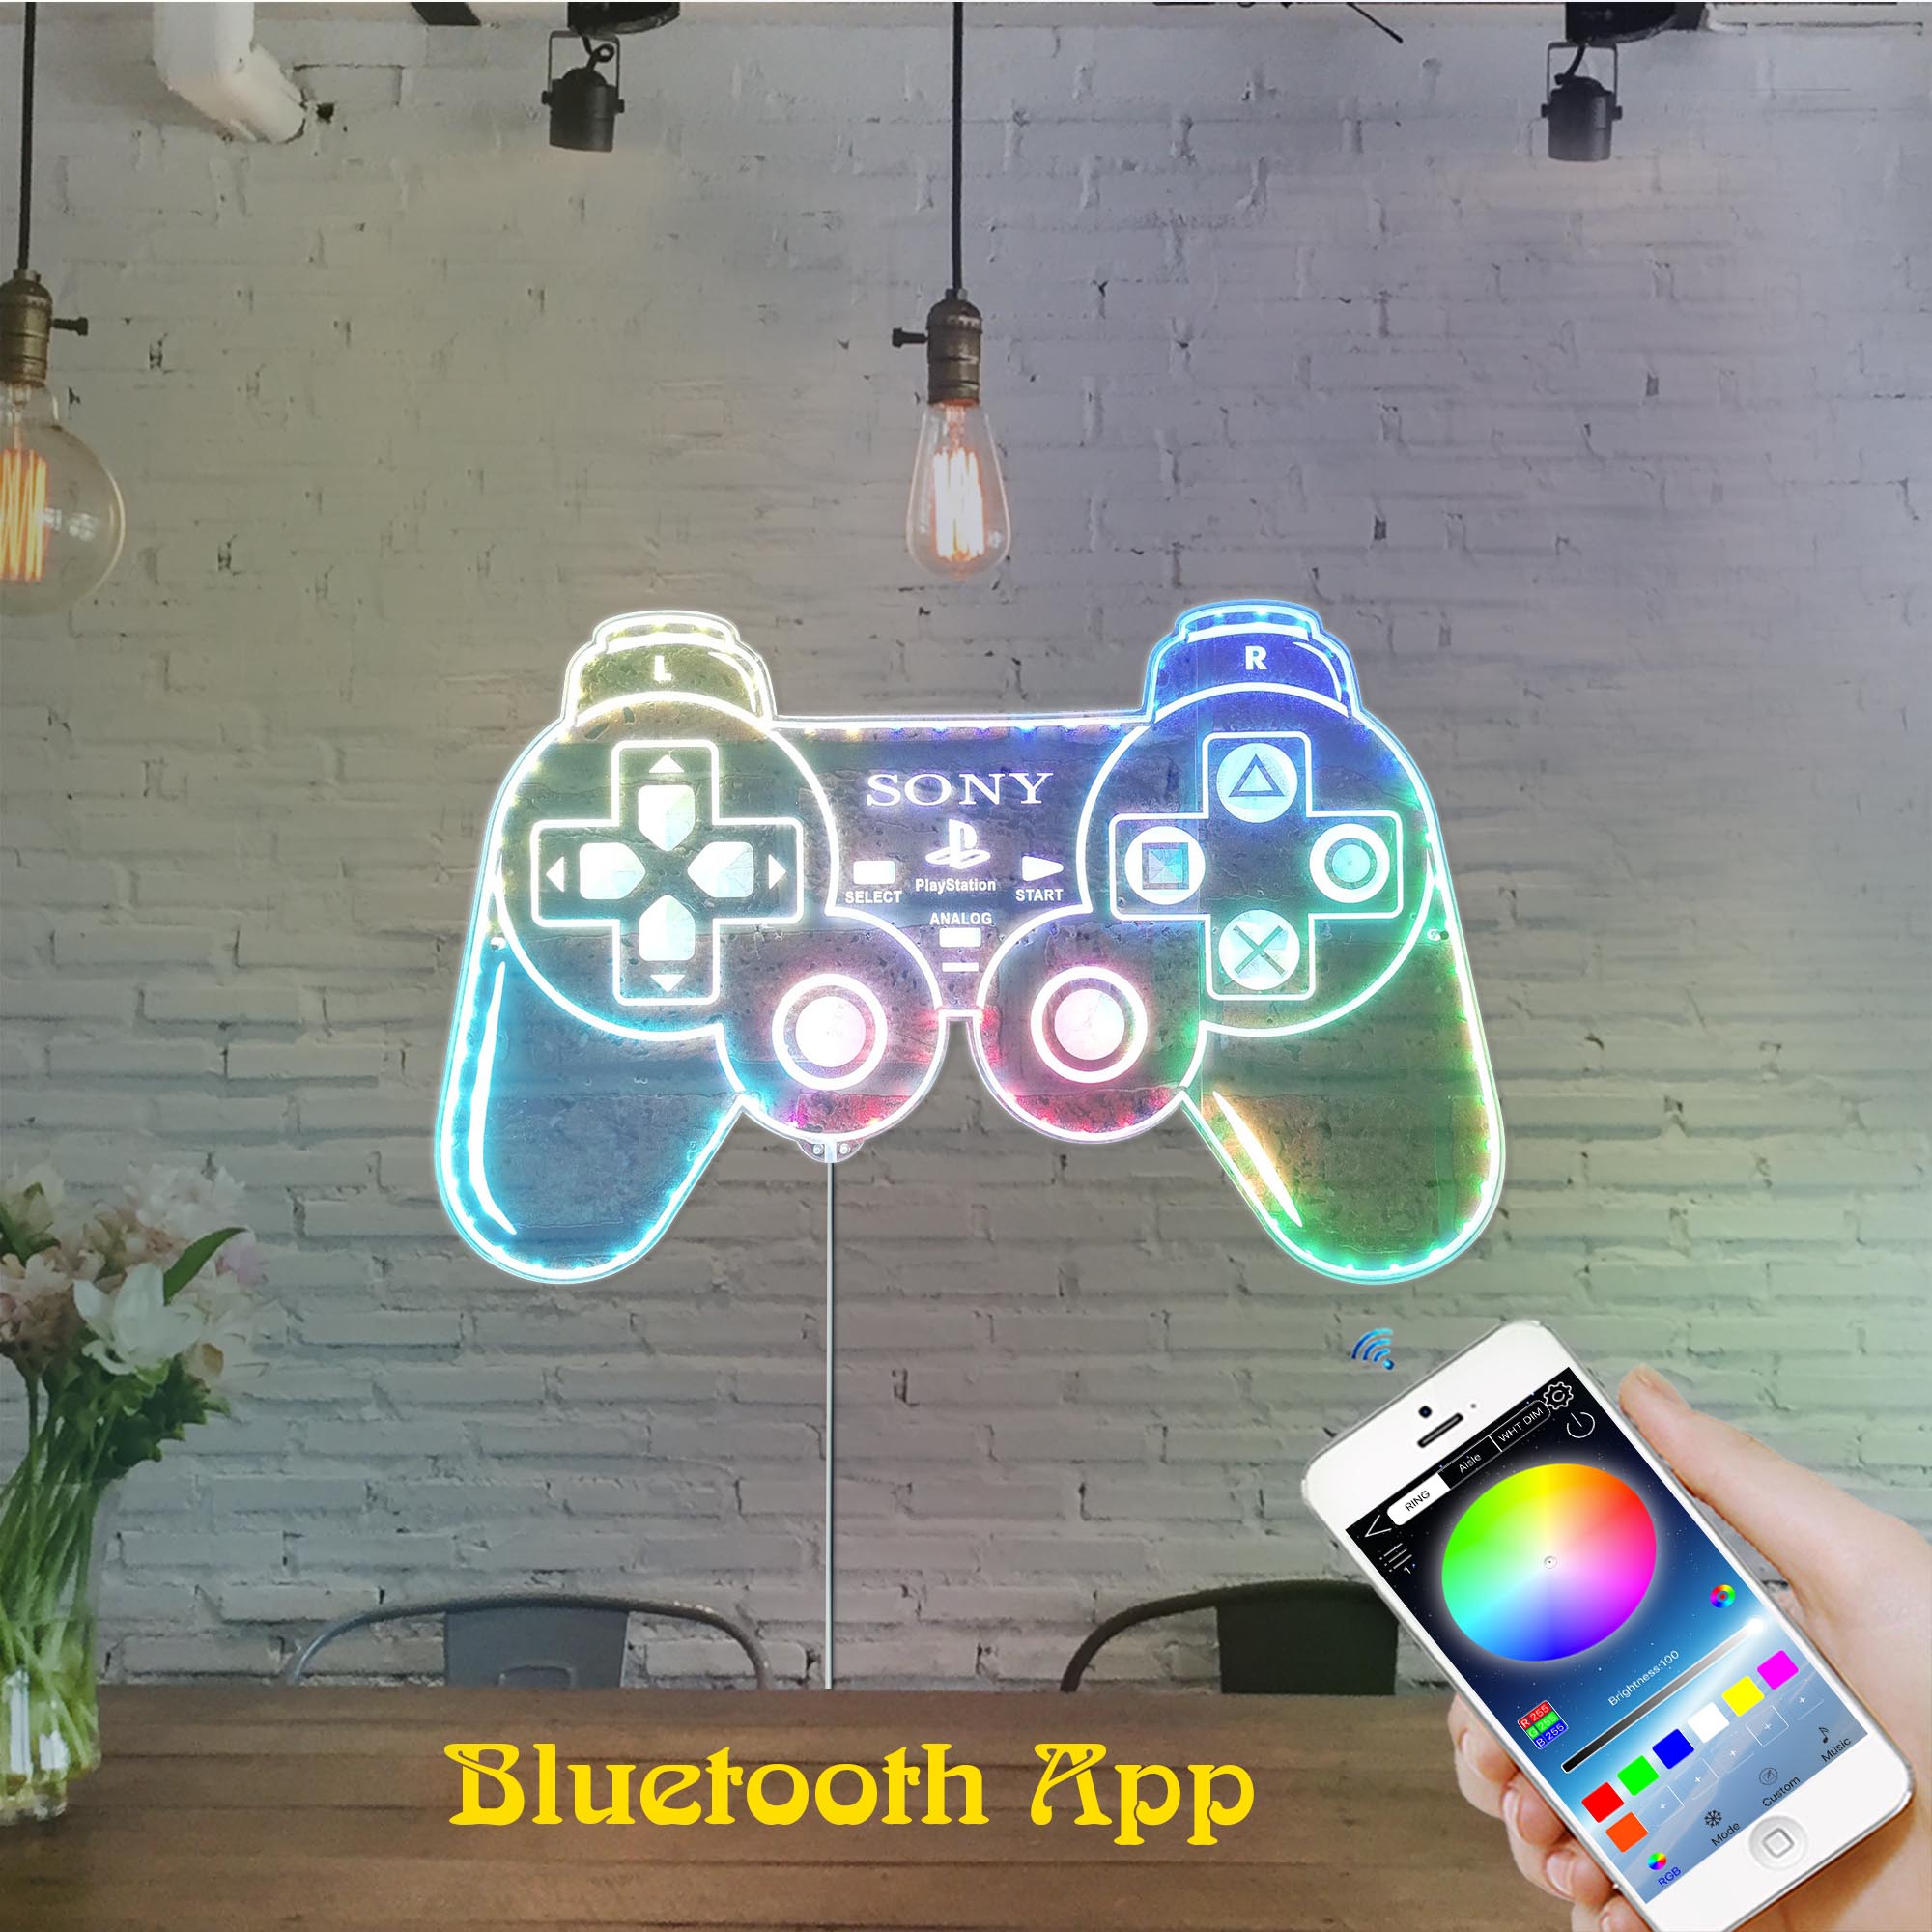 Playstation Game Controller Dynamic RGB Edge Lit LED Sign